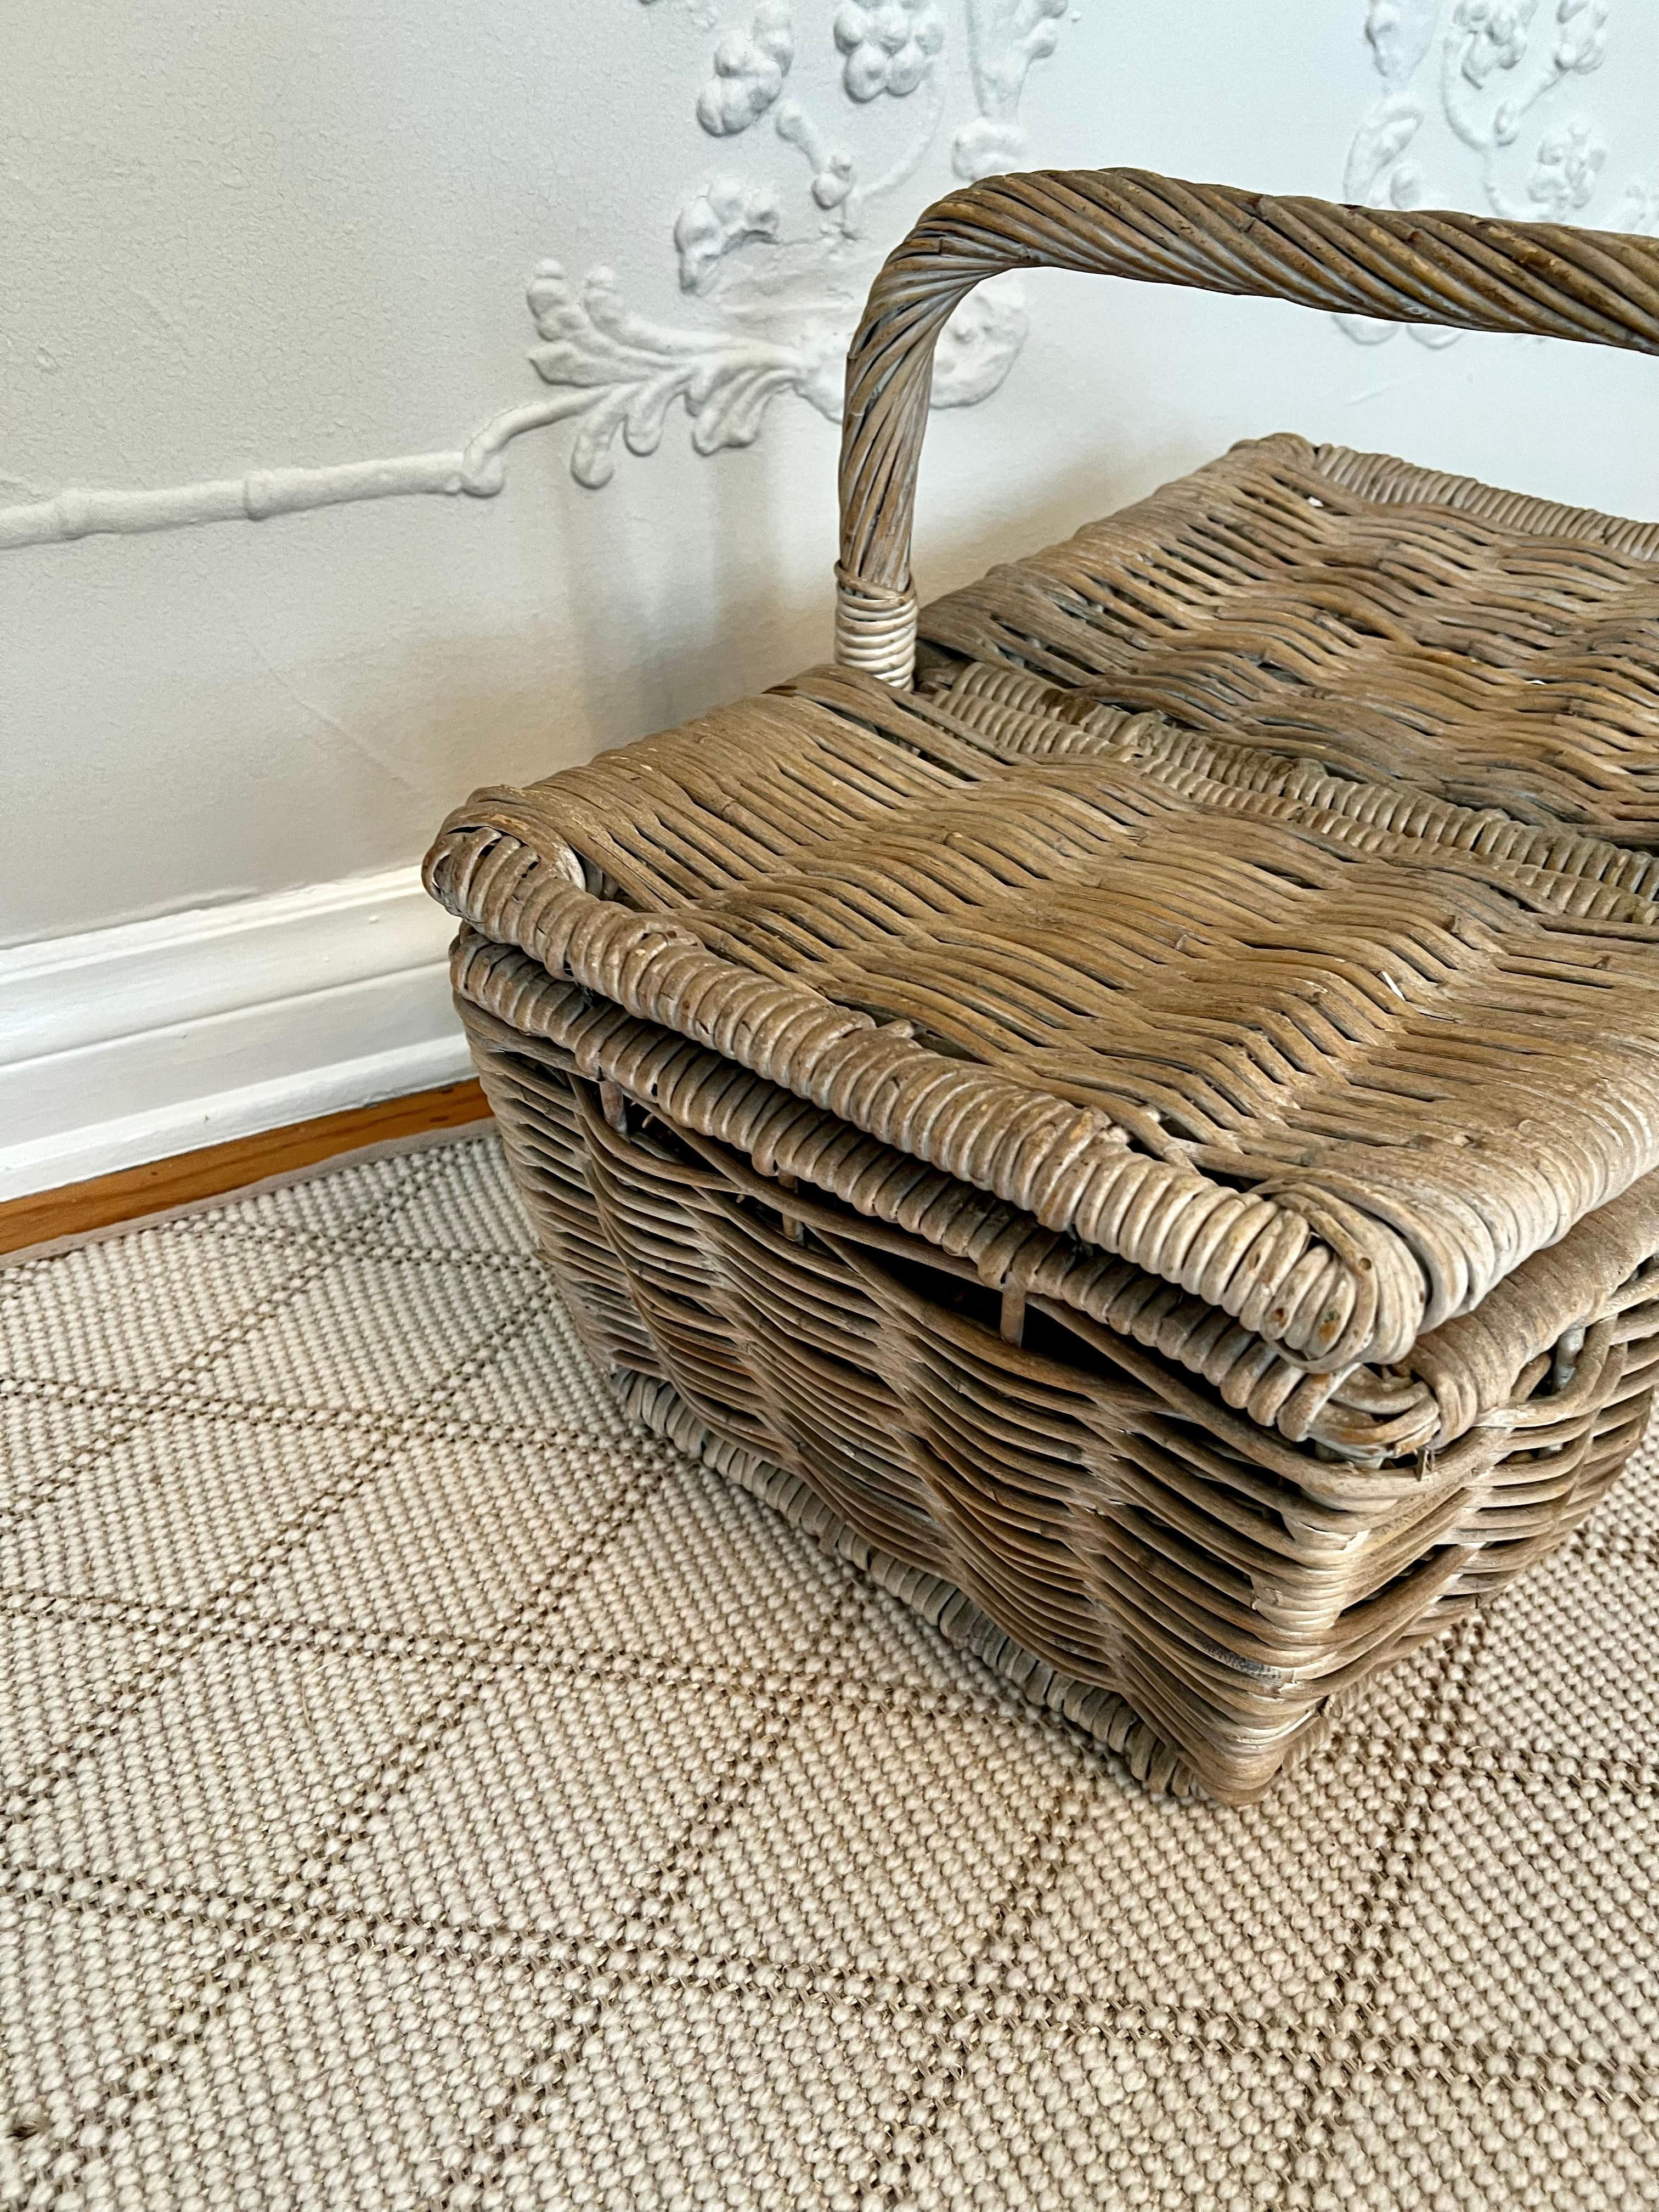 Woven Rattan Picnic Basket with Center Handle and Duo Opening Sides For Sale 2